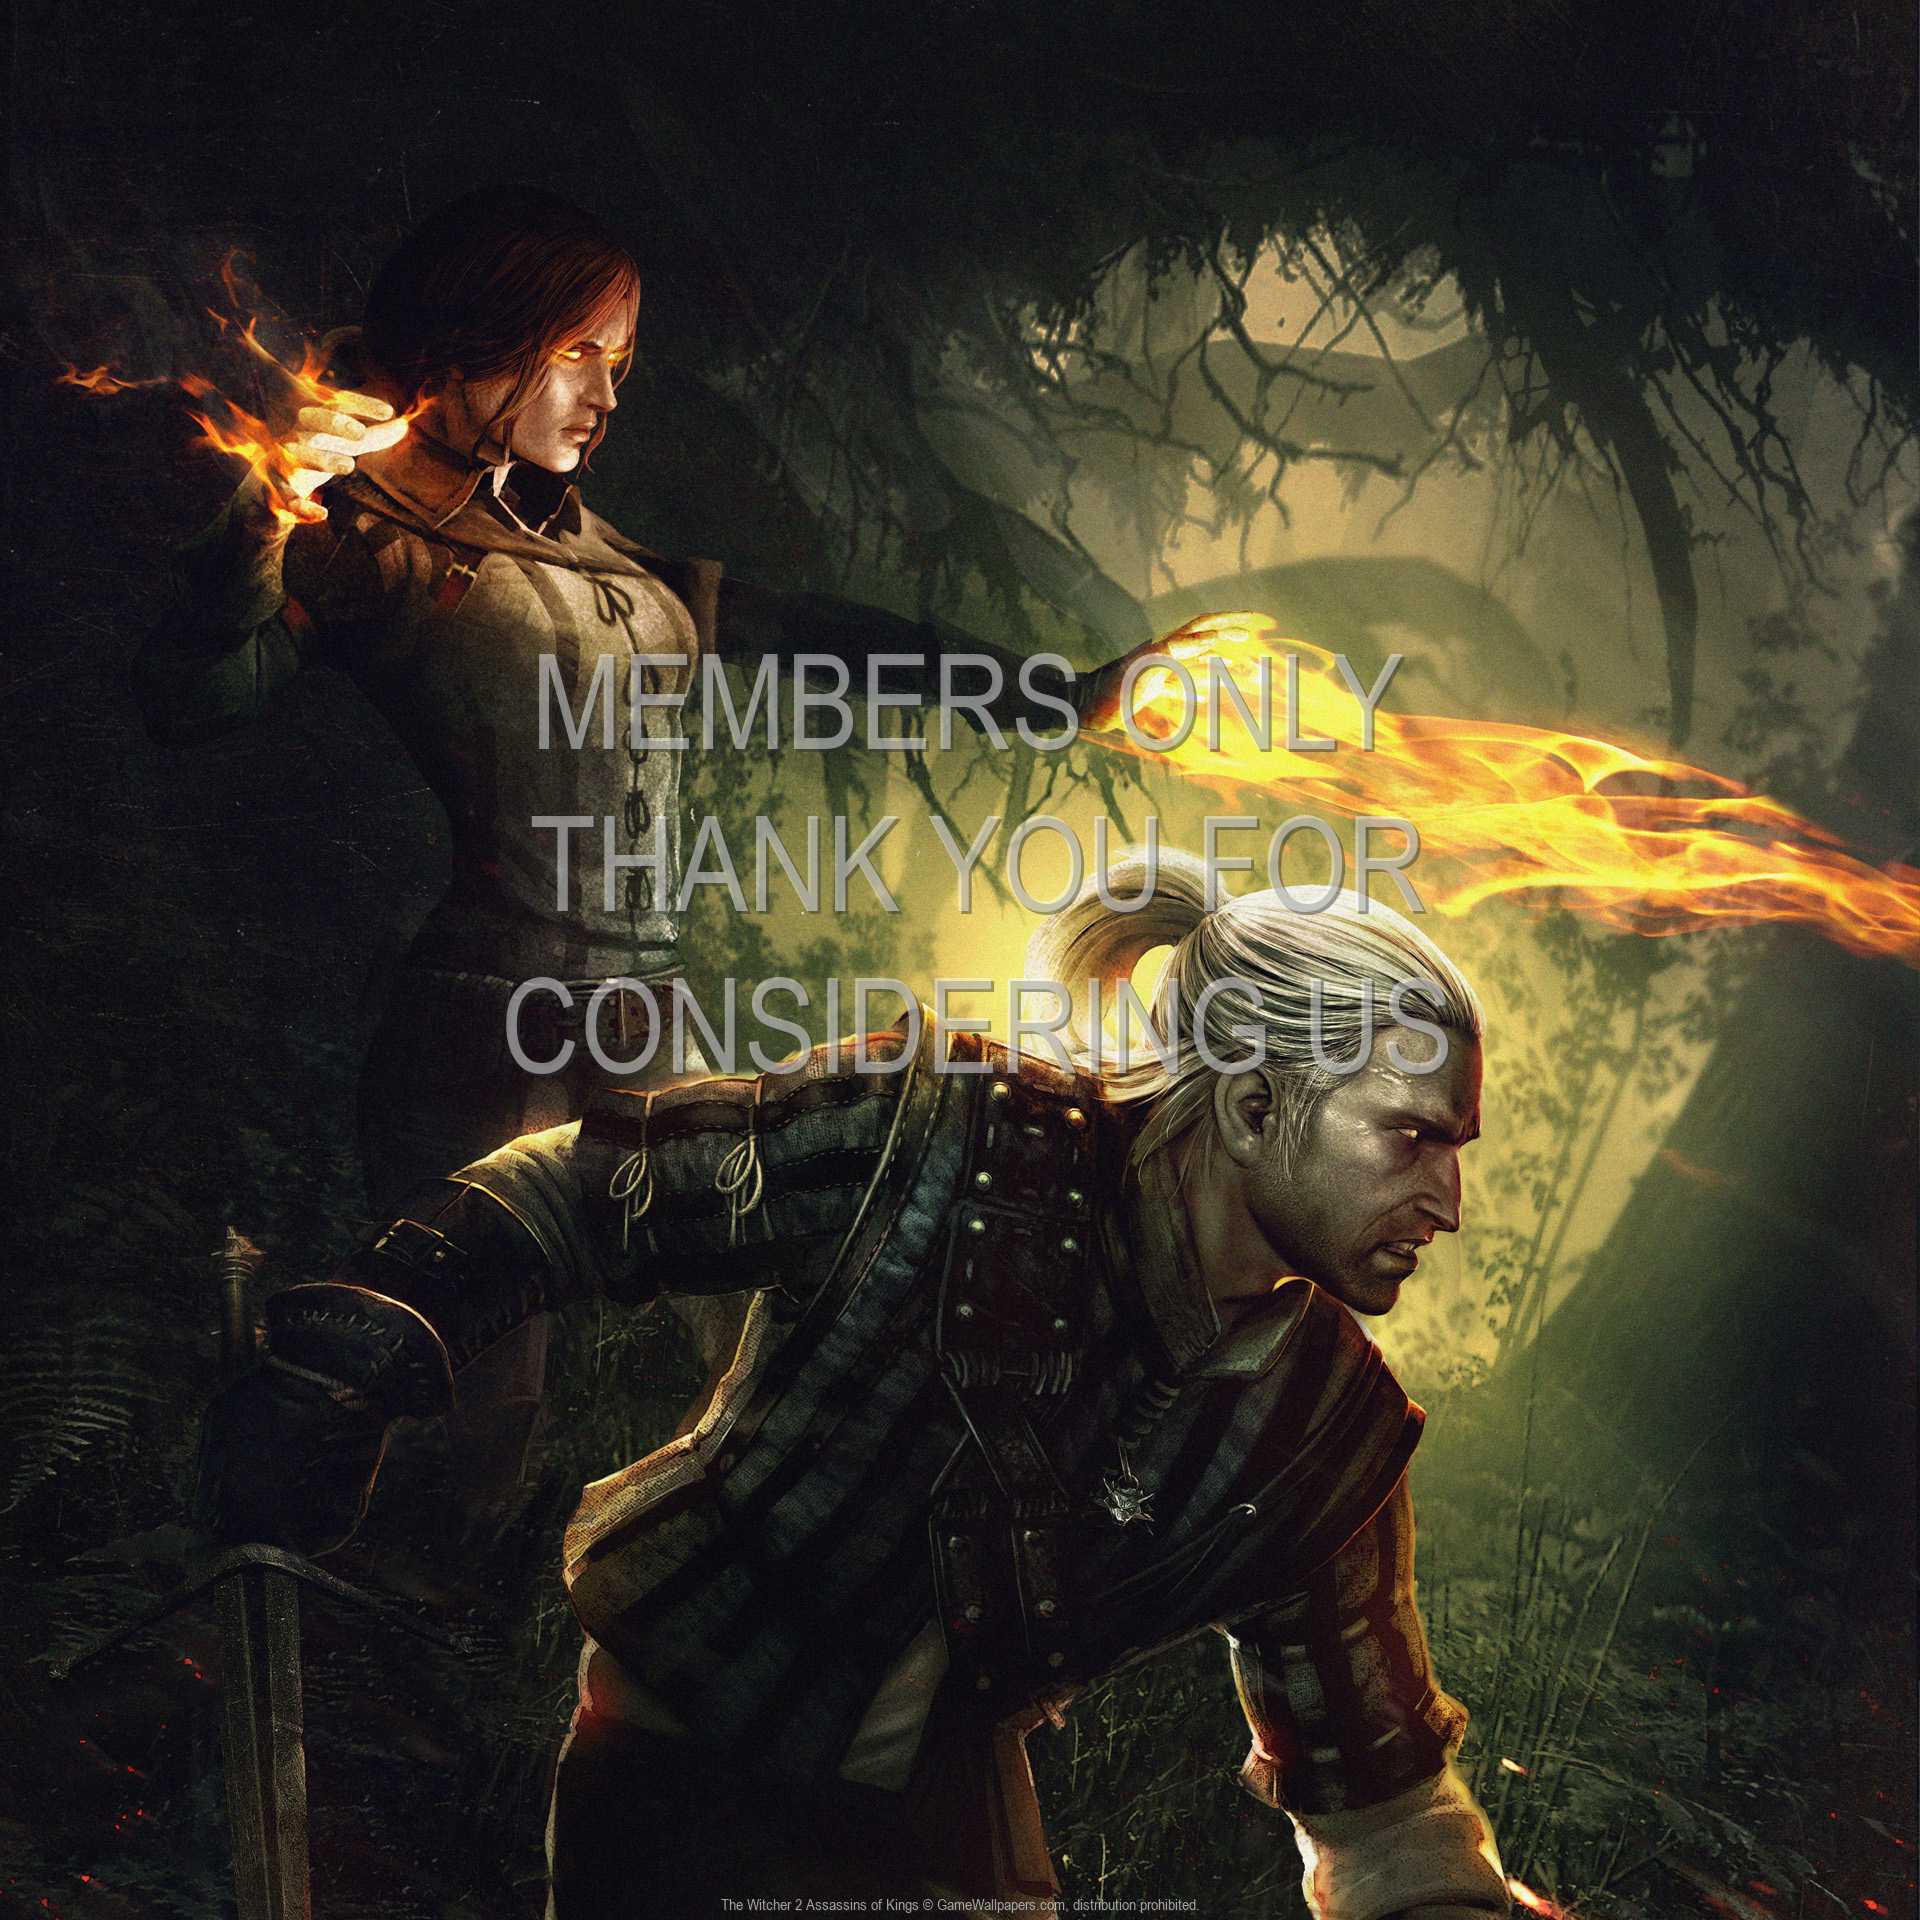 The Witcher 2: Assassins of Kings 1080p Horizontal Mobiele achtergrond 08